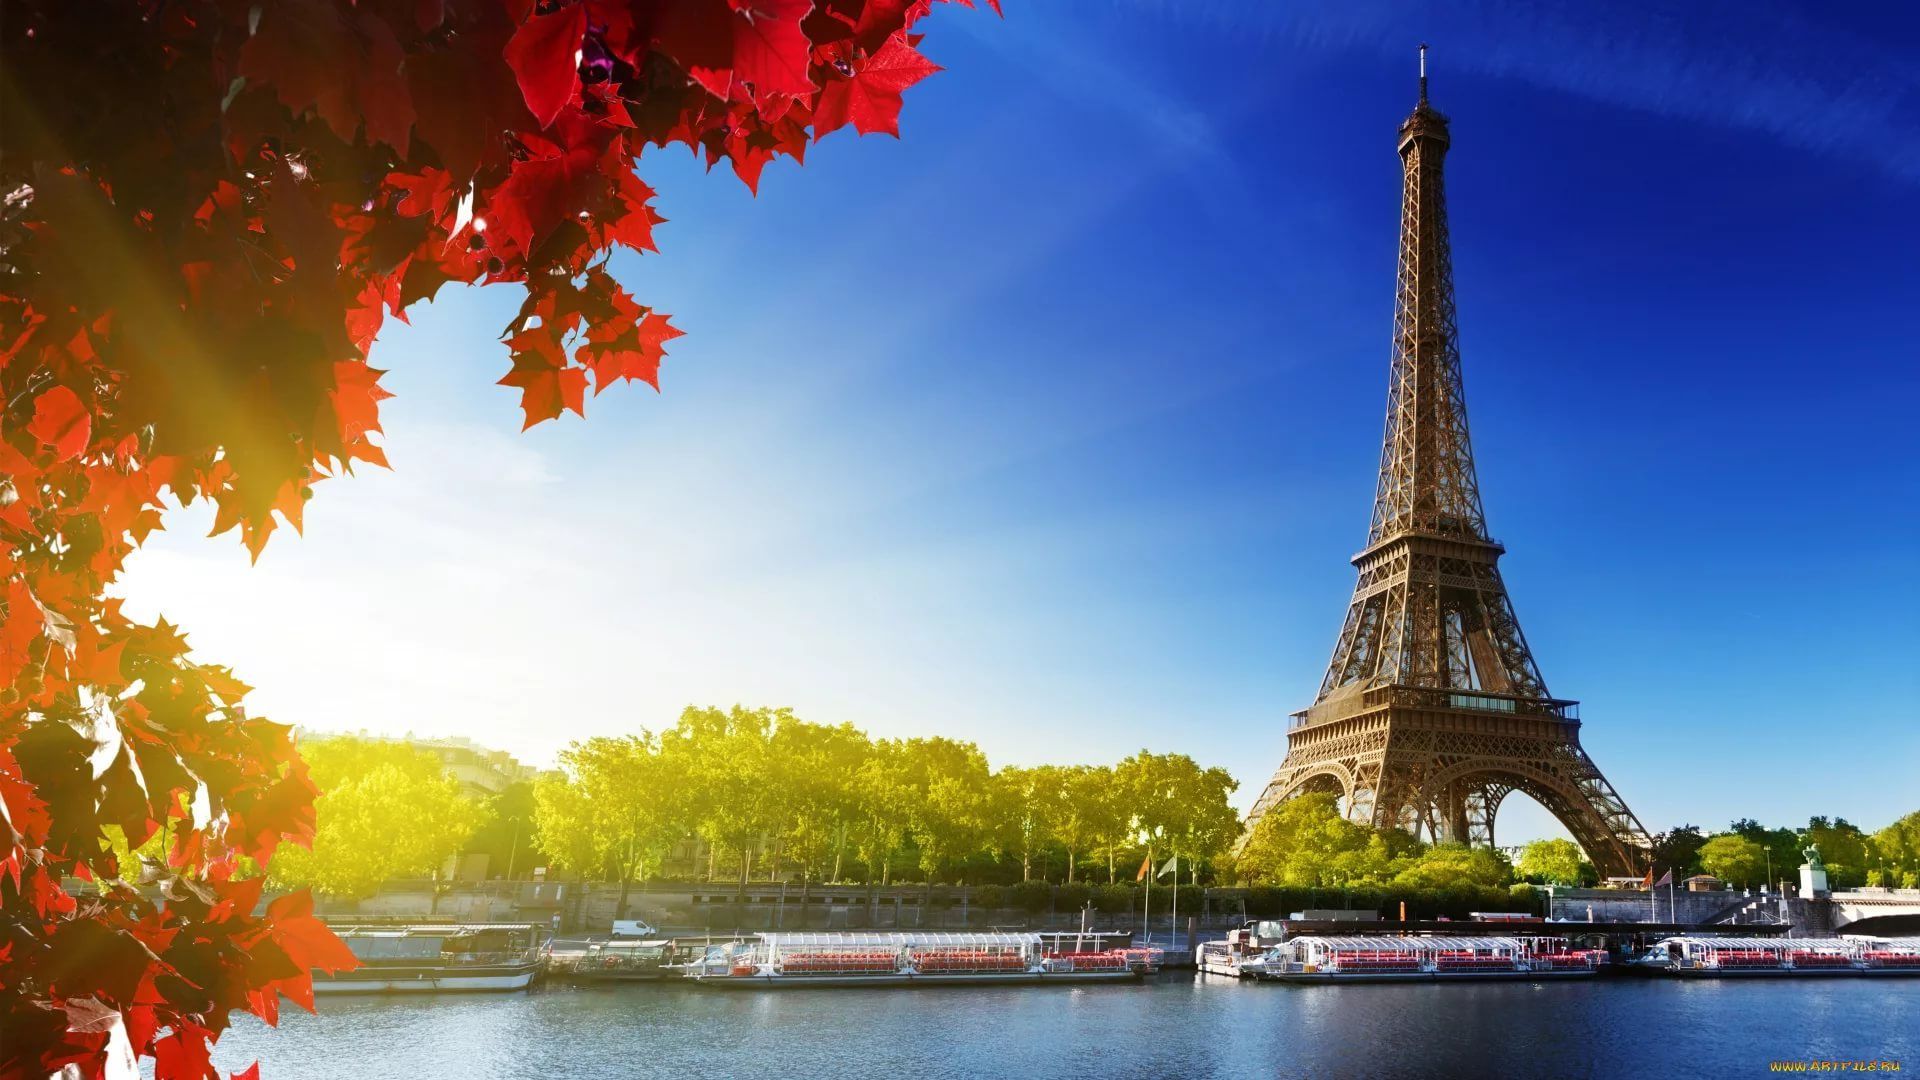 The eiffel tower is seen in front of a river - Paris